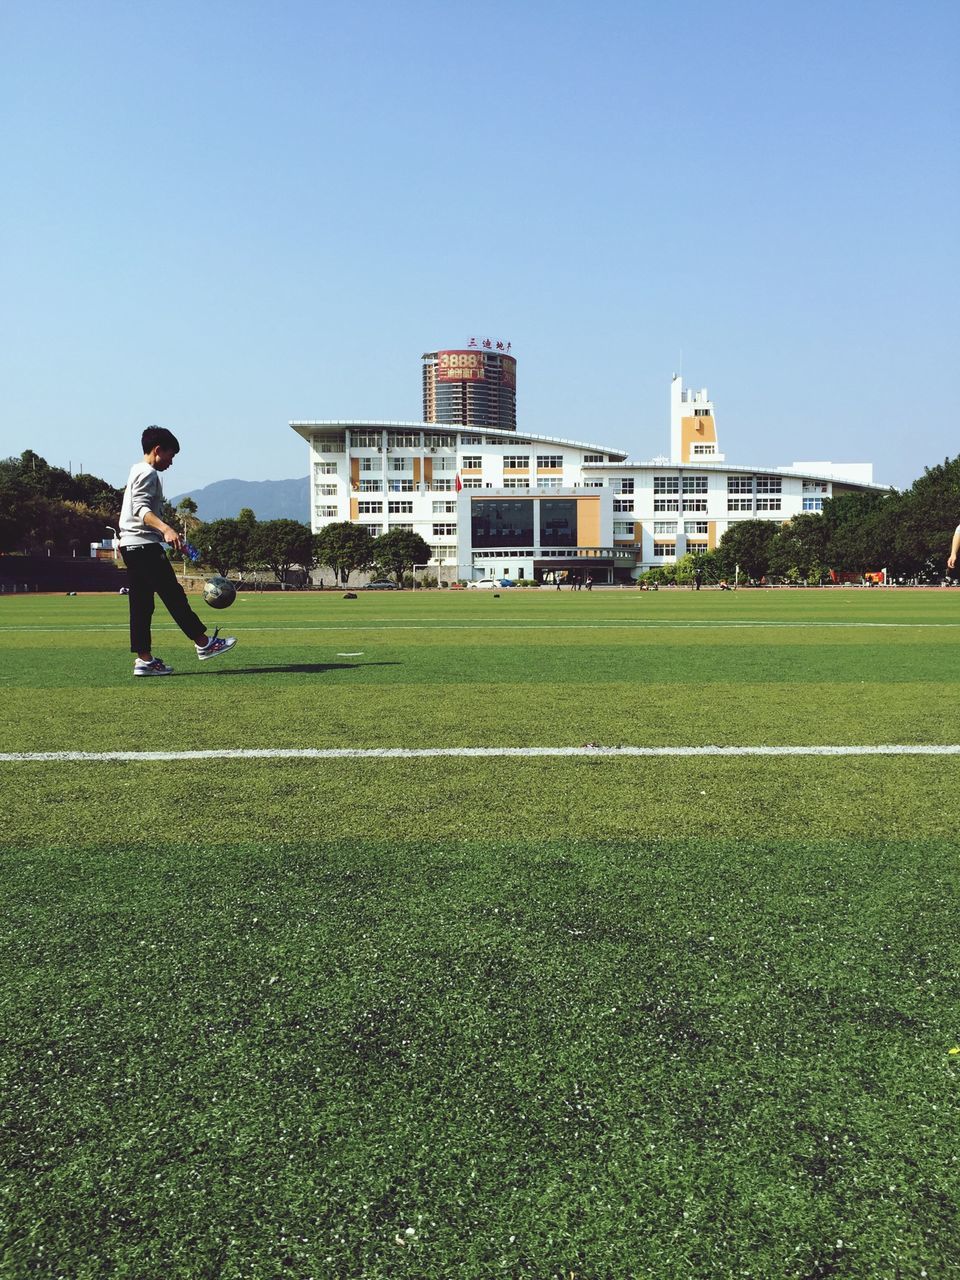 grass, clear sky, lifestyles, leisure activity, full length, copy space, architecture, building exterior, field, green color, built structure, casual clothing, men, grassy, blue, boys, walking, childhood